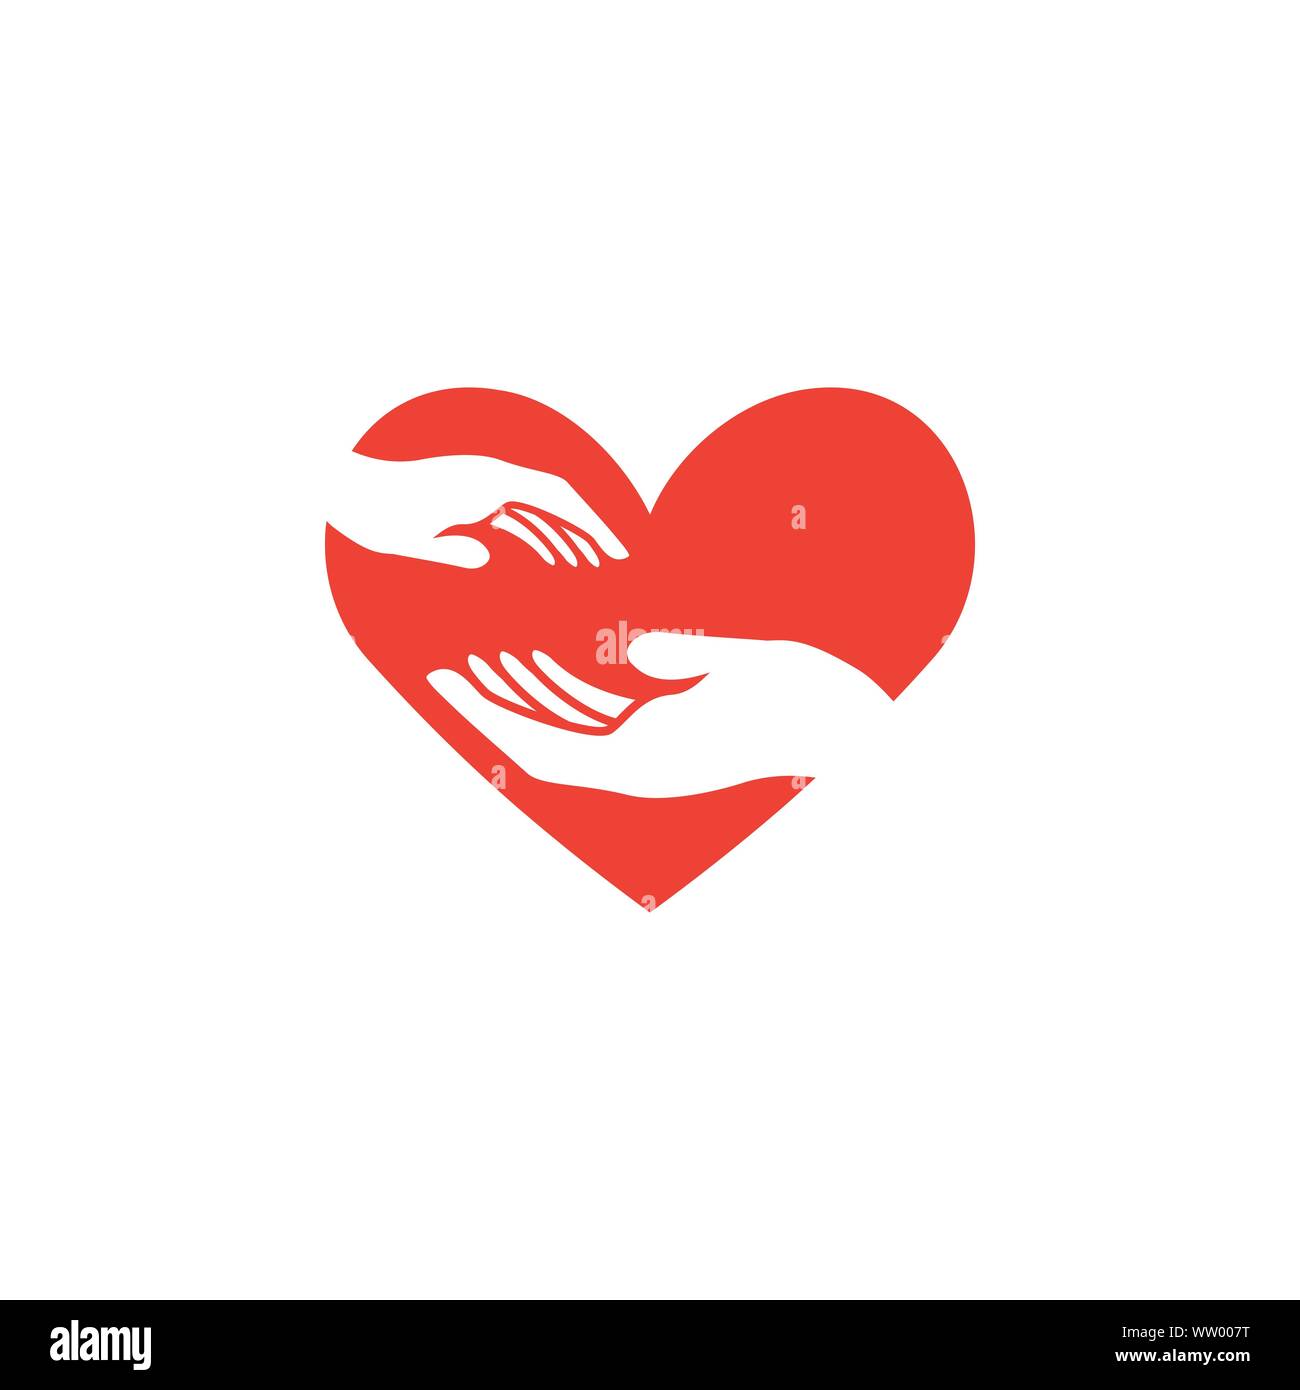 Care hand graphic design template vector isolated Stock Vector Image ...